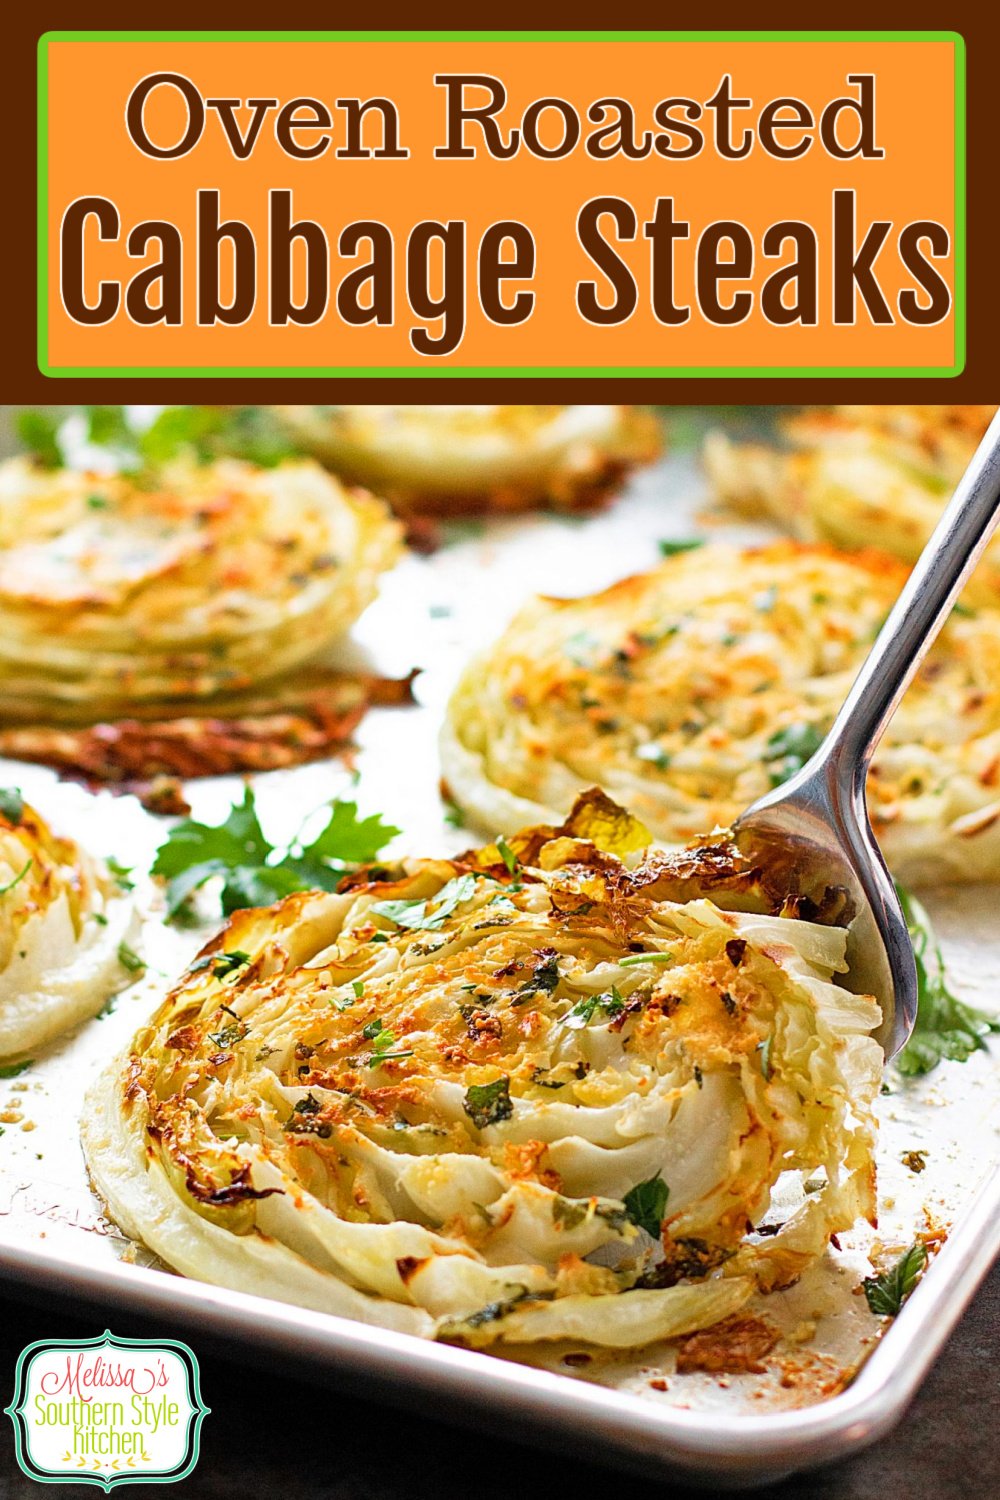 These Oven Roasted Cabbage Steaks make an inexpensive main dish or as a side dish alongside your favorite entrees #cabbagesteaks #roastedcabbage #lowcarbrecipes #cabbage #ovenroastedcabbage #roastedvegetables #sidedishrecipes #southernfood #southernrecipes via @melissasssk